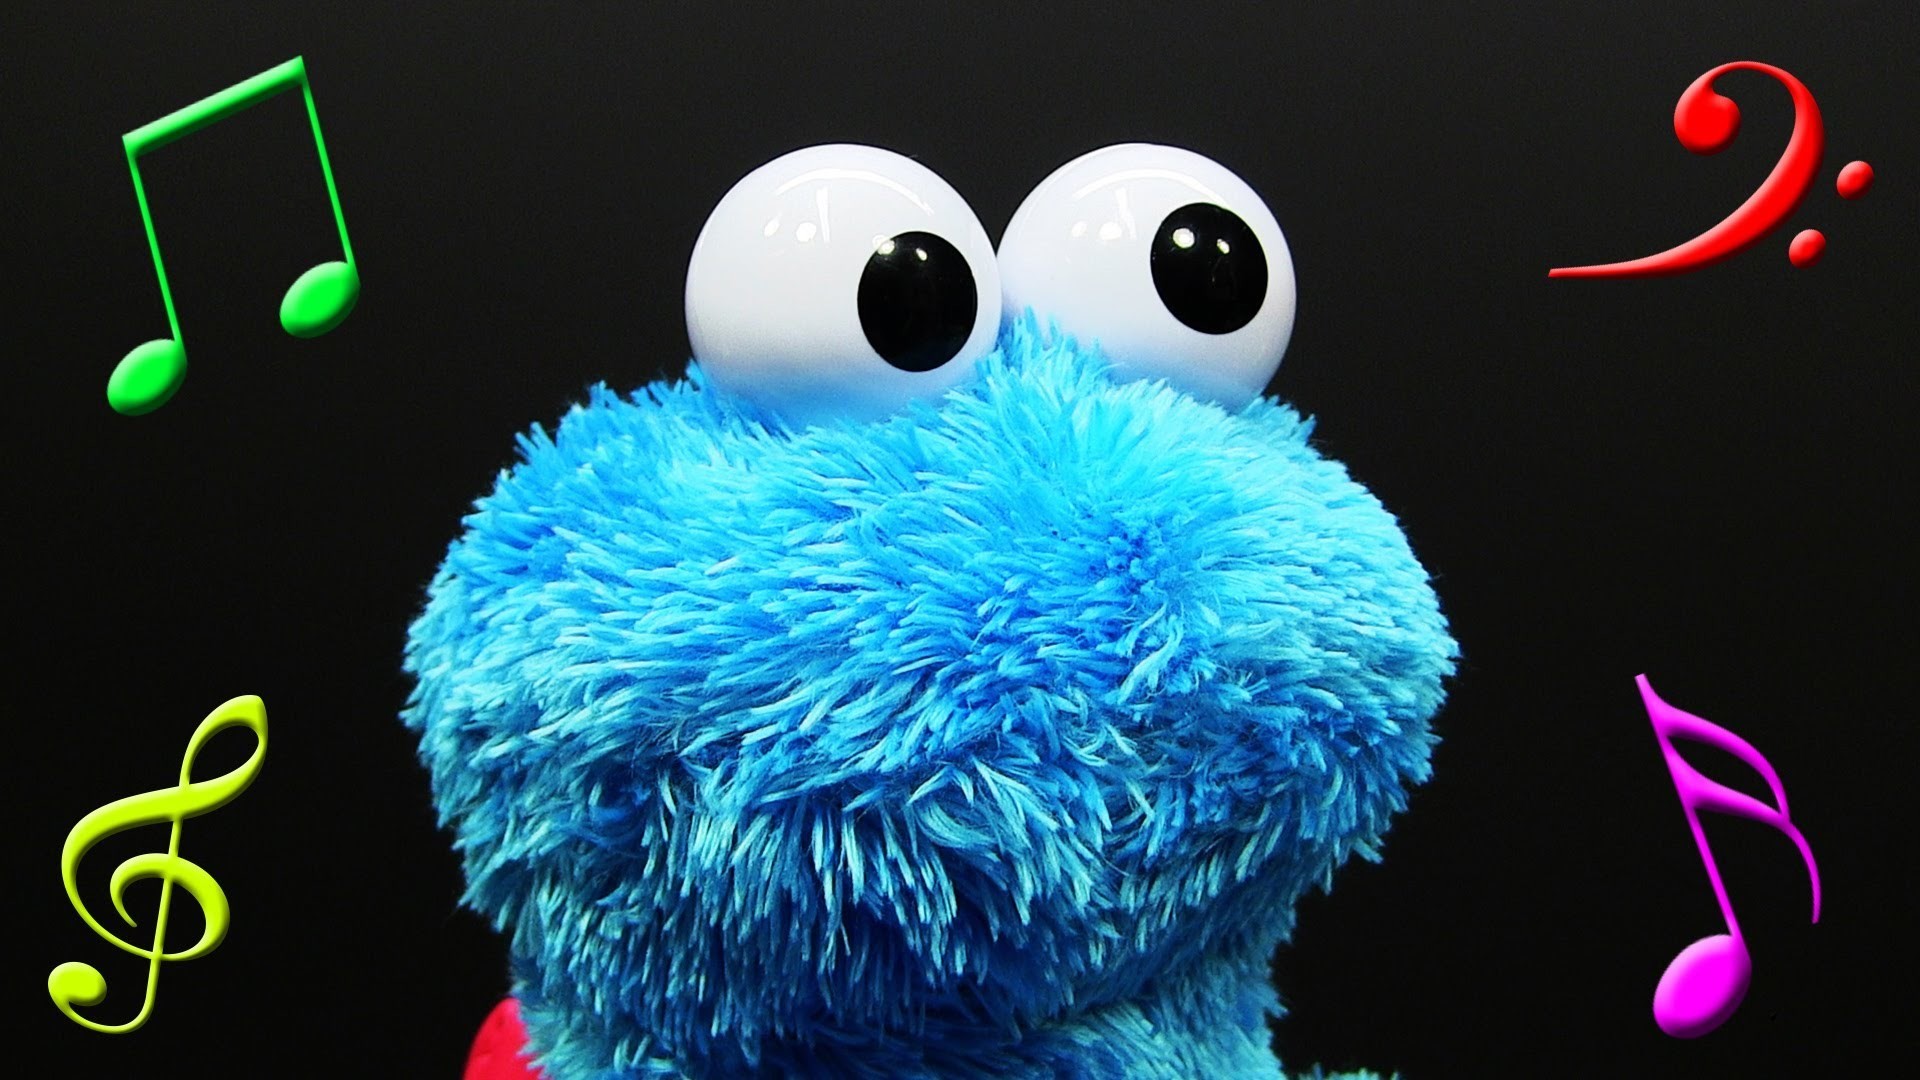 1920x1080 Taylor Grant - Awesome cute cookie monster wallpaper - 1920 x 1080 px